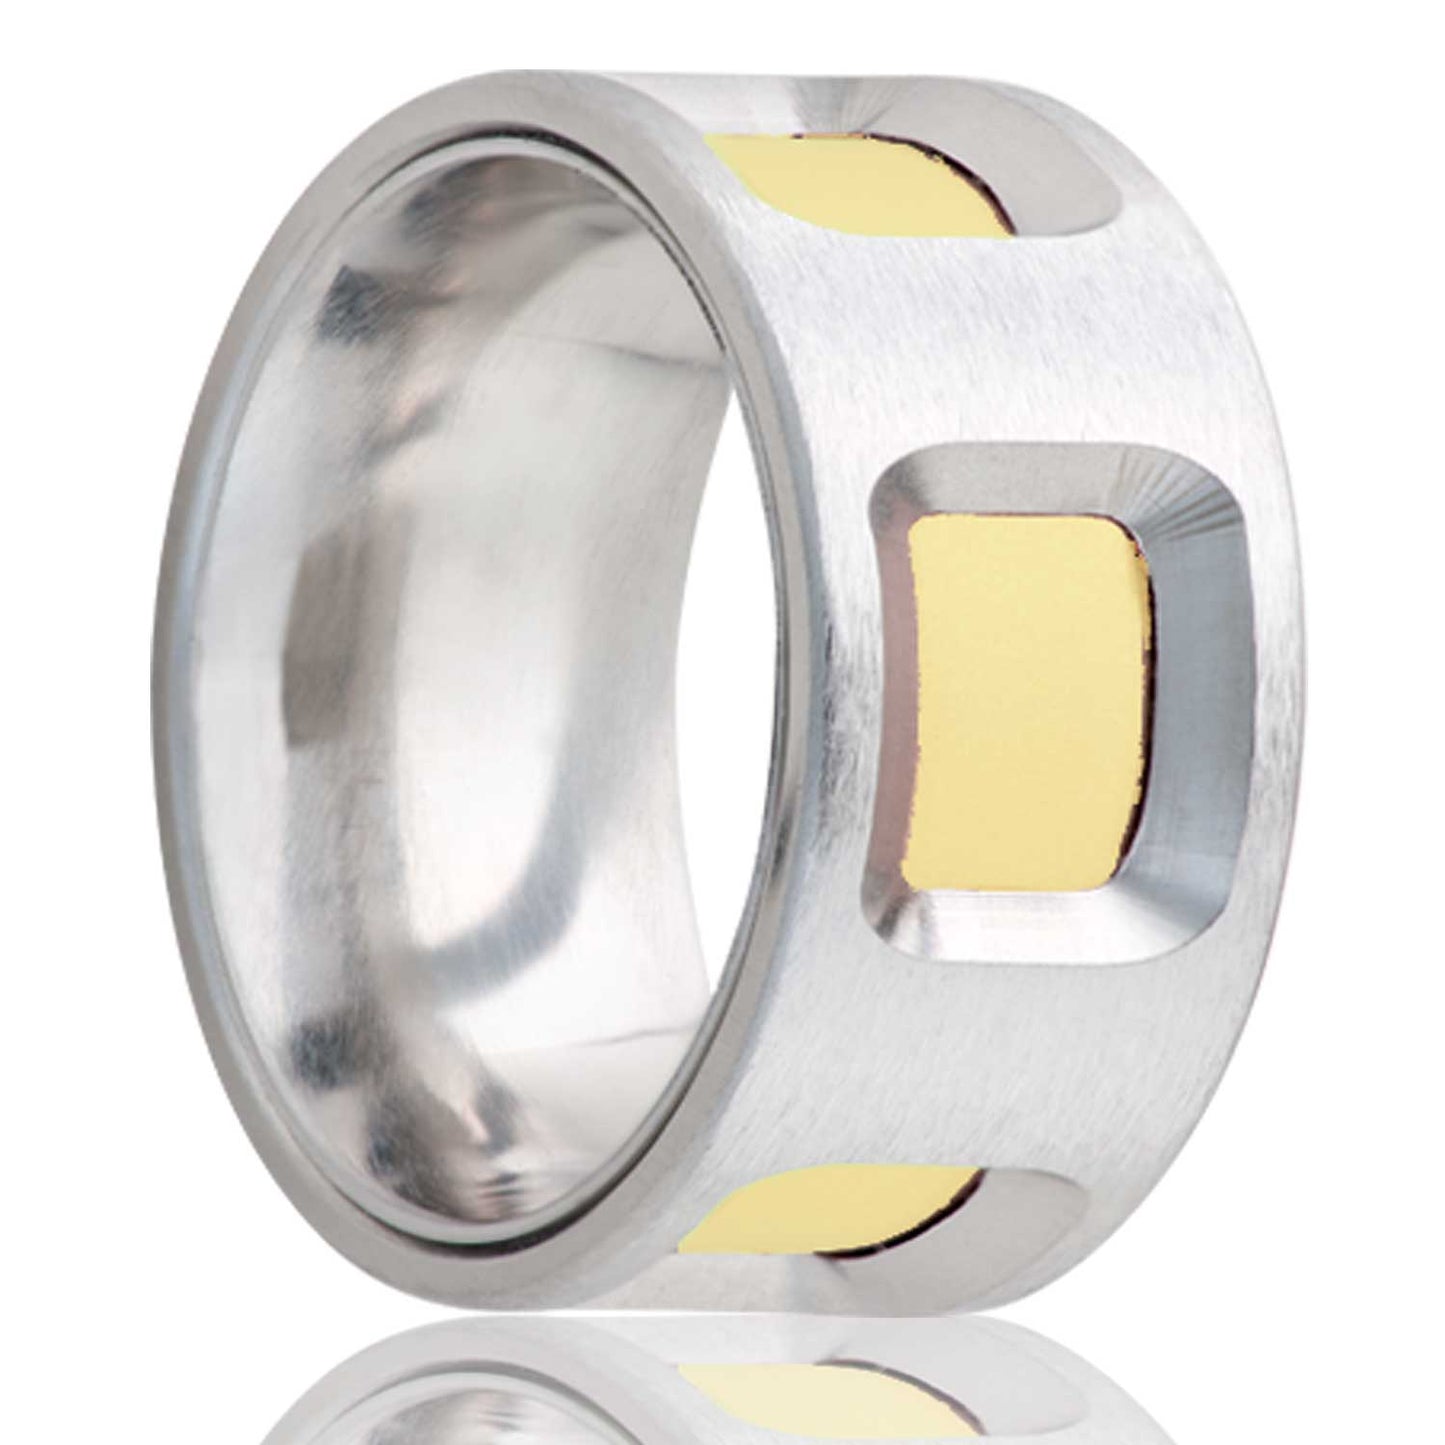 A cobalt men's men's wedding band with 14k yellow gold inlays displayed on a neutral white background.